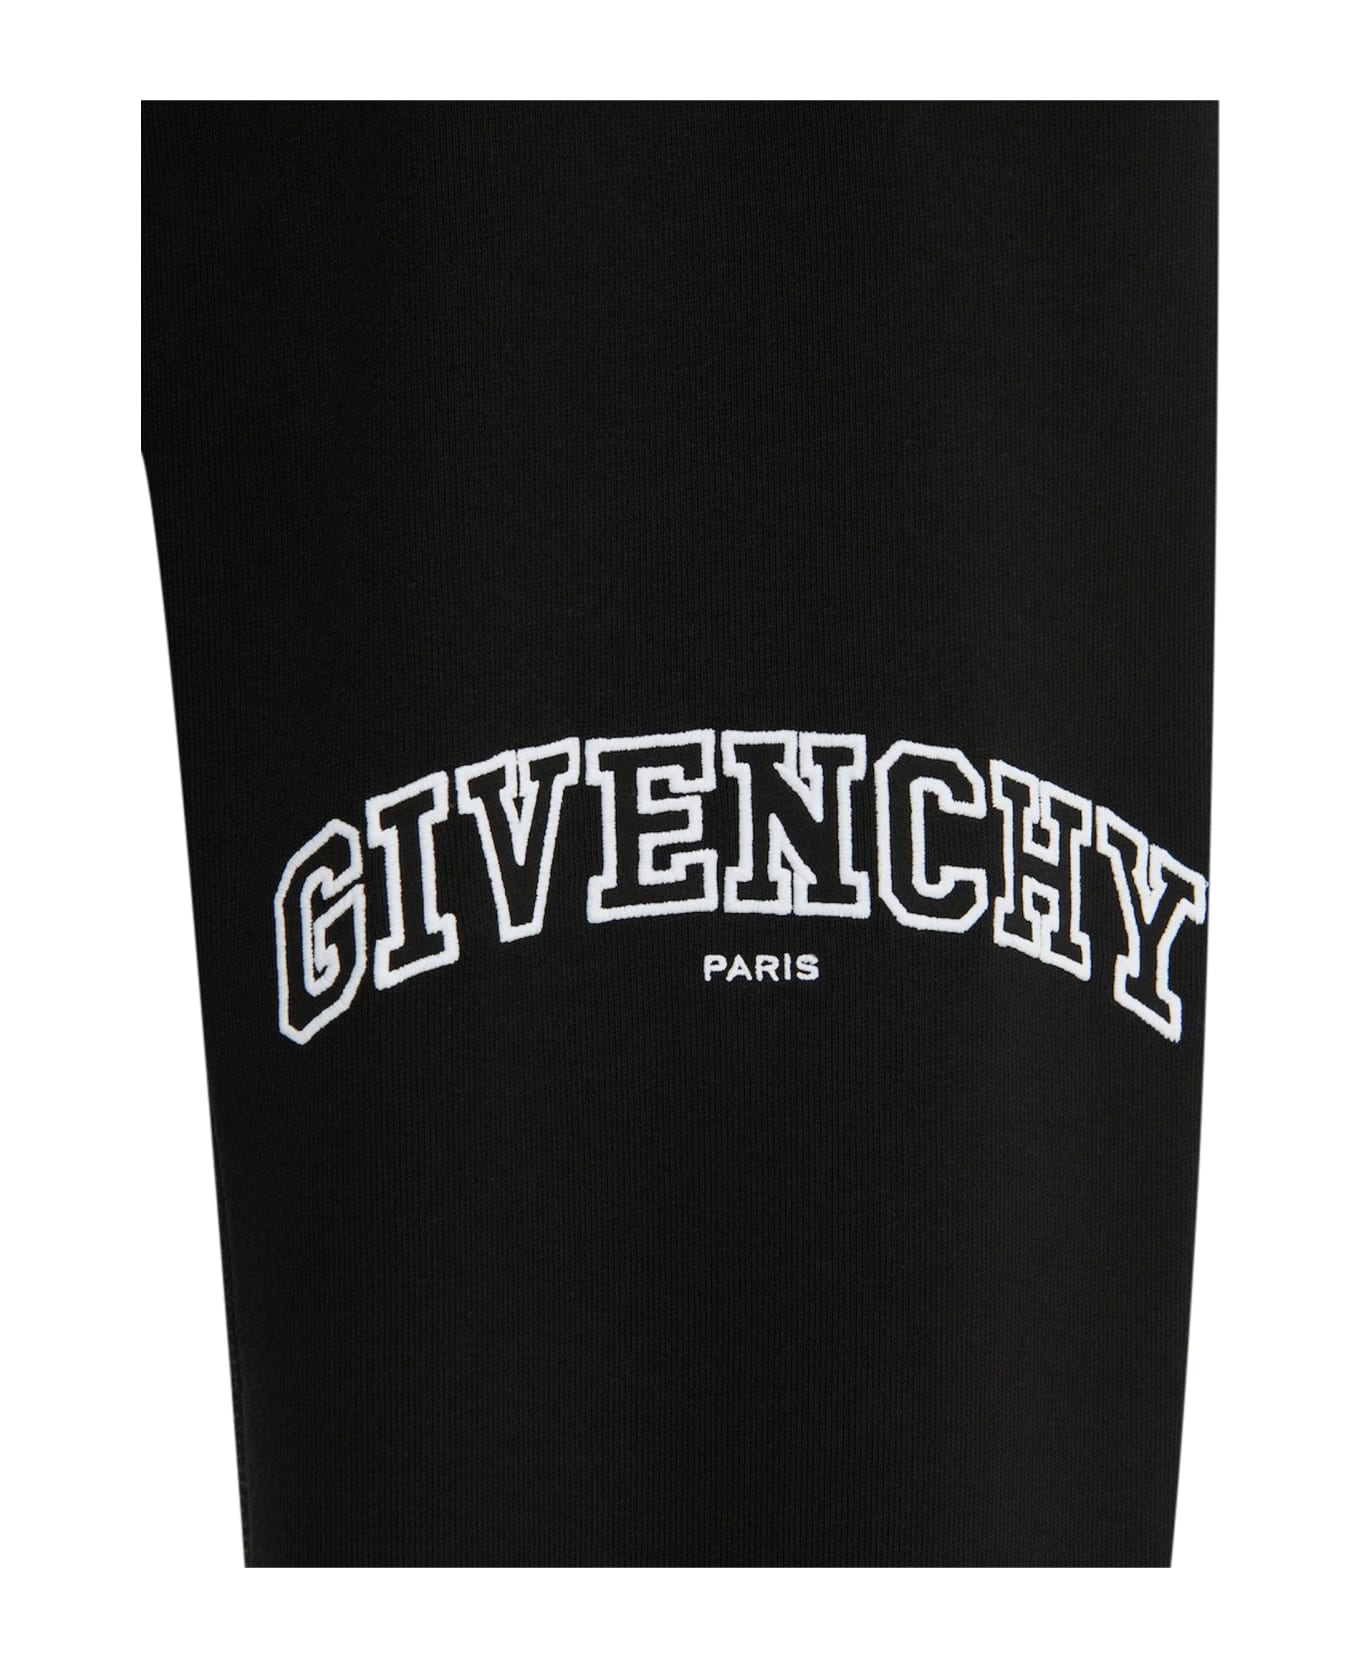 Givenchy puts this New Sacramento shirt in its W/  Embroidery - Black